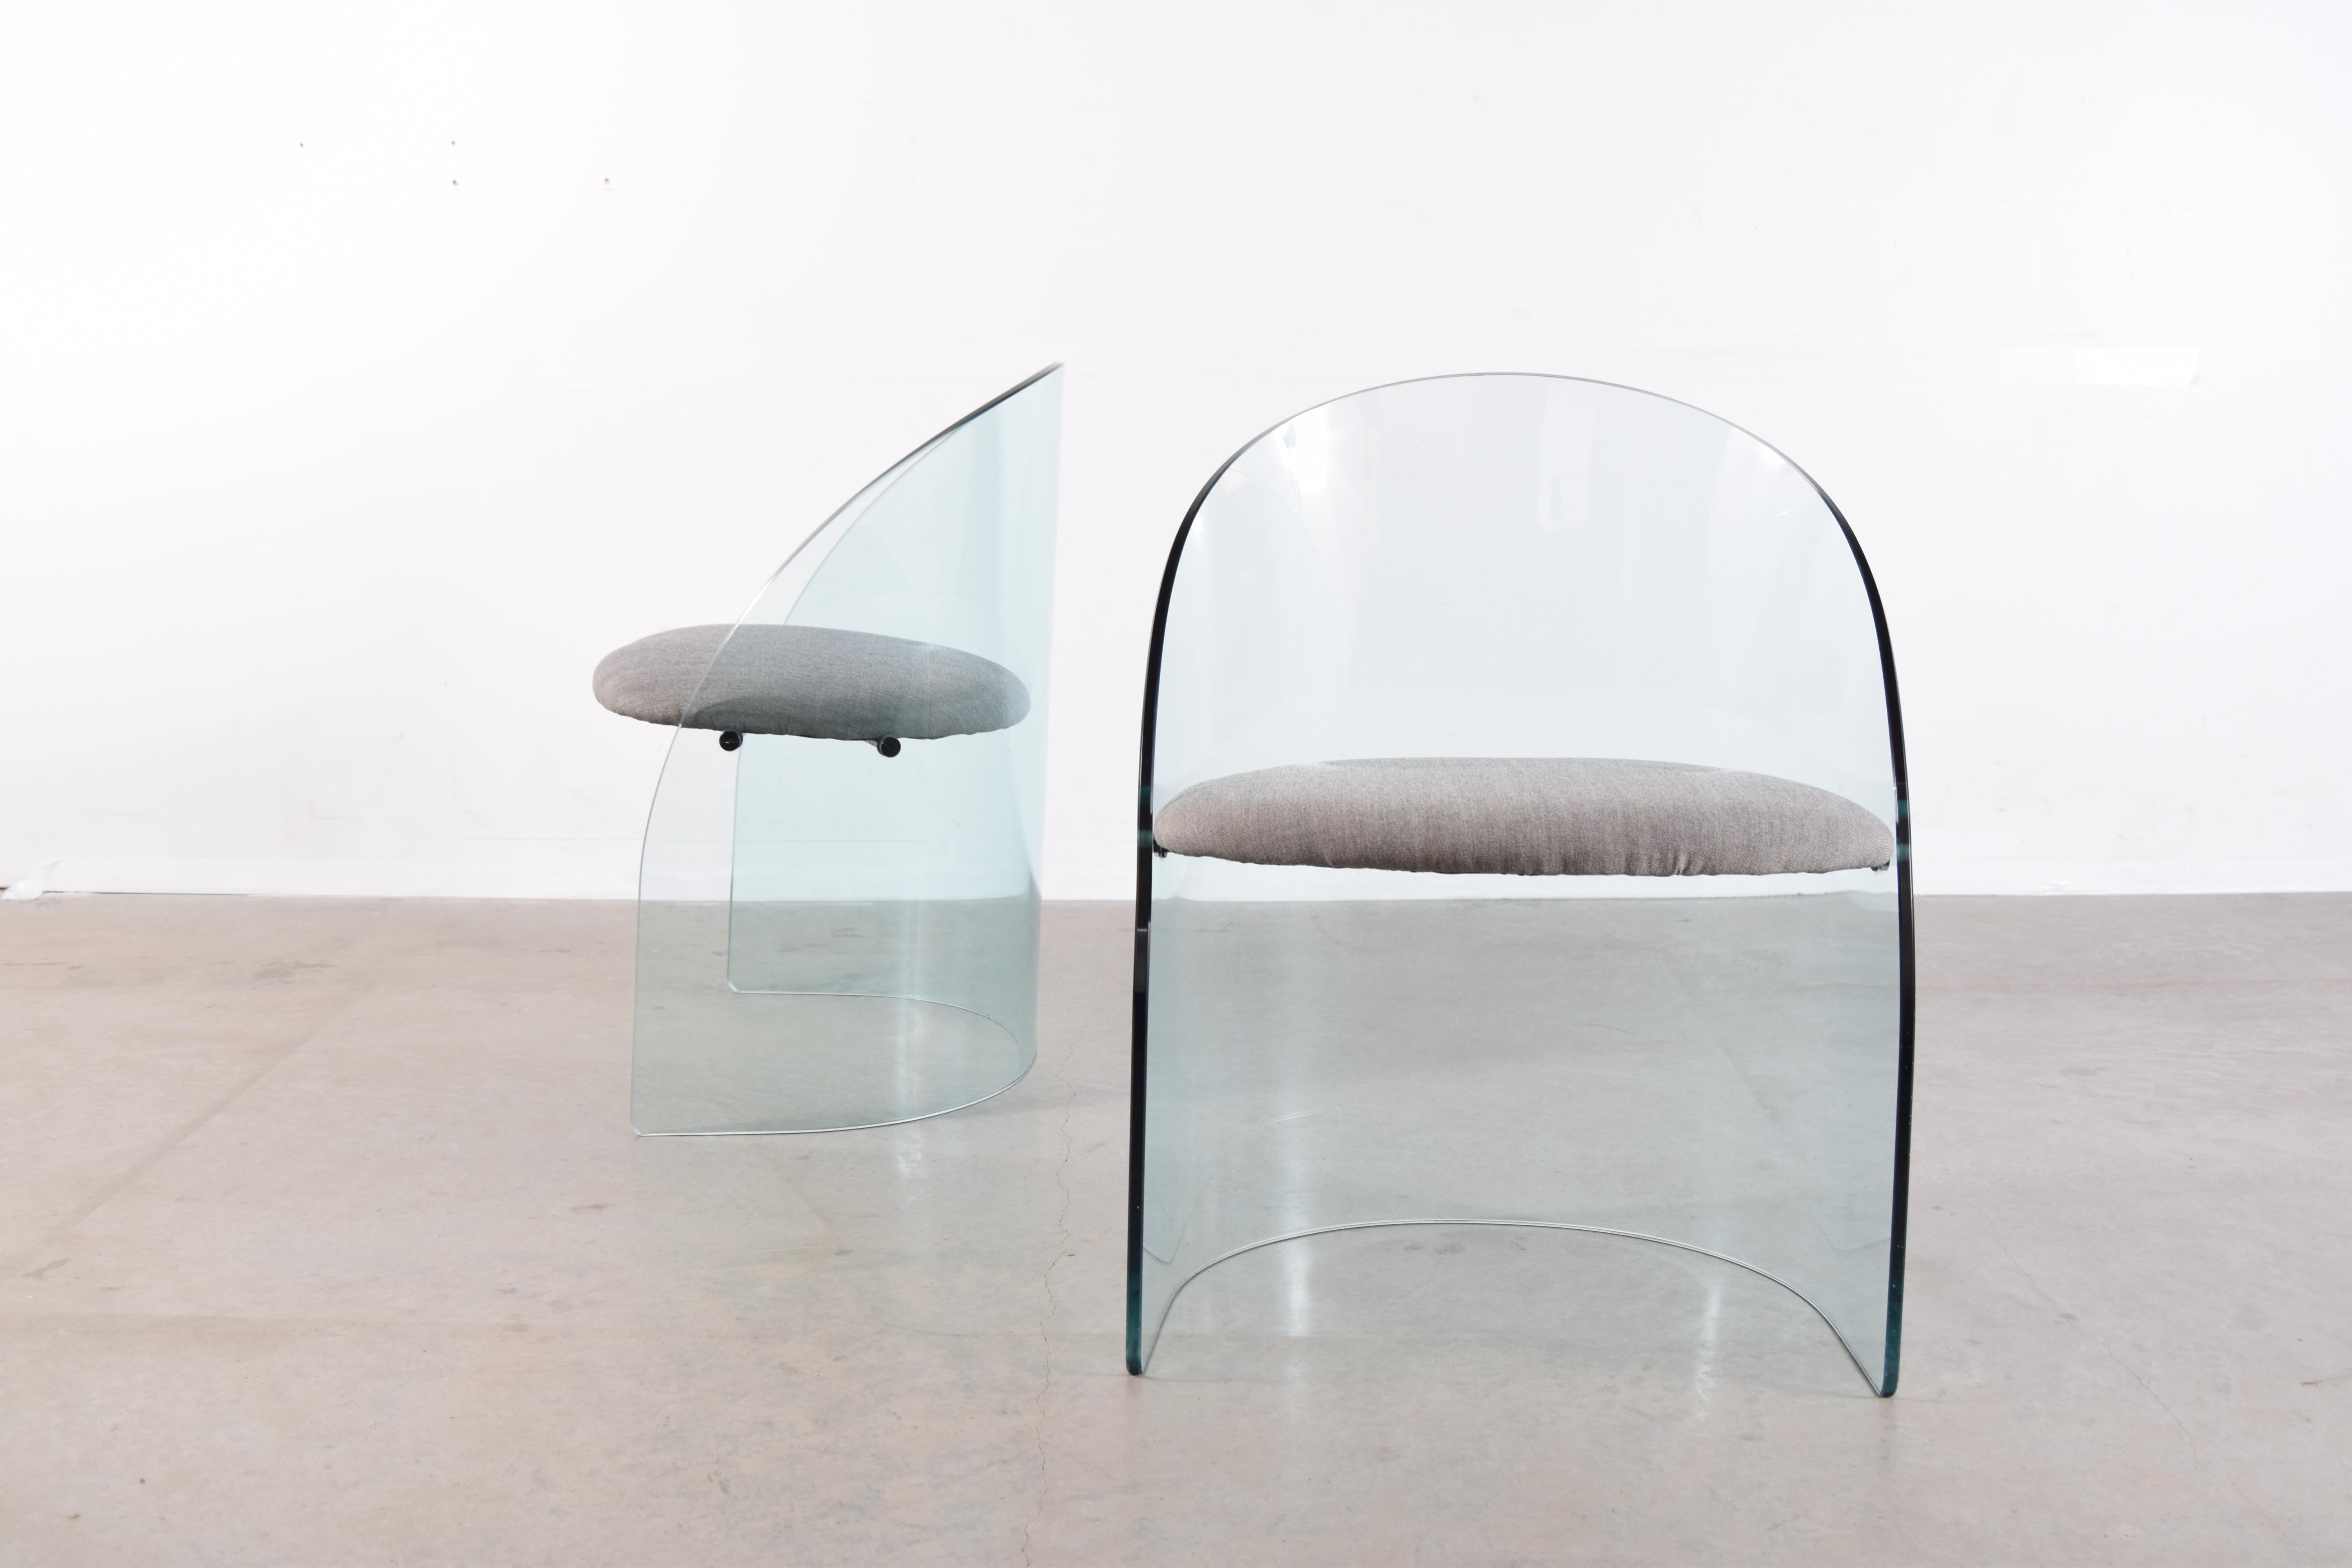 Pair of plate glass chairs in the manner of the chair that Louis Dierra designed for the Glass Center Pavillon at the 1939 World’s Fair in New York, that were manufactured by the Pittsburgh Plate Glass company. Unsure as to the designer /